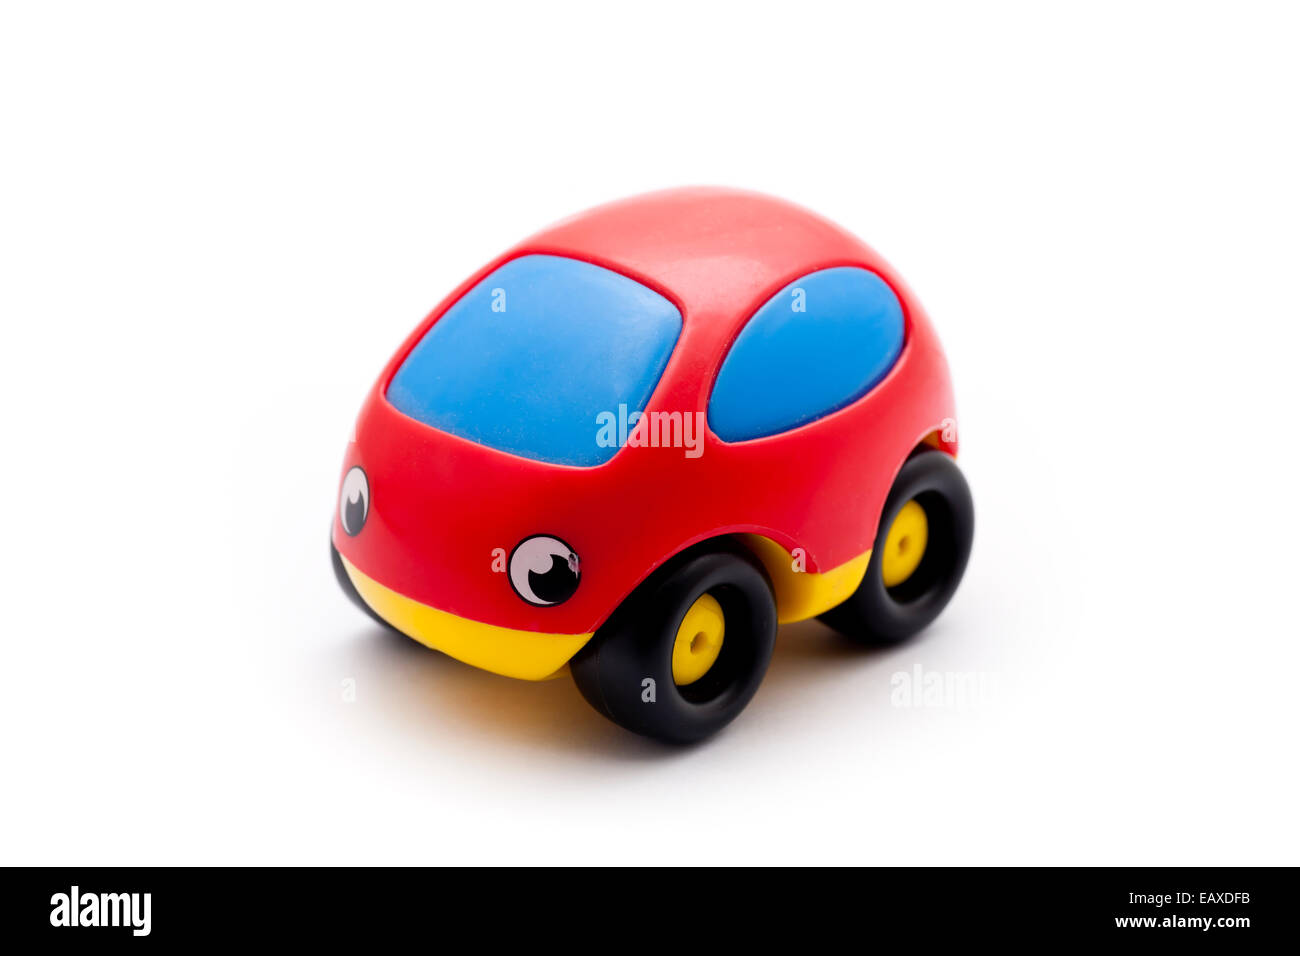 Red toy car isolated on white background. Stock Photo